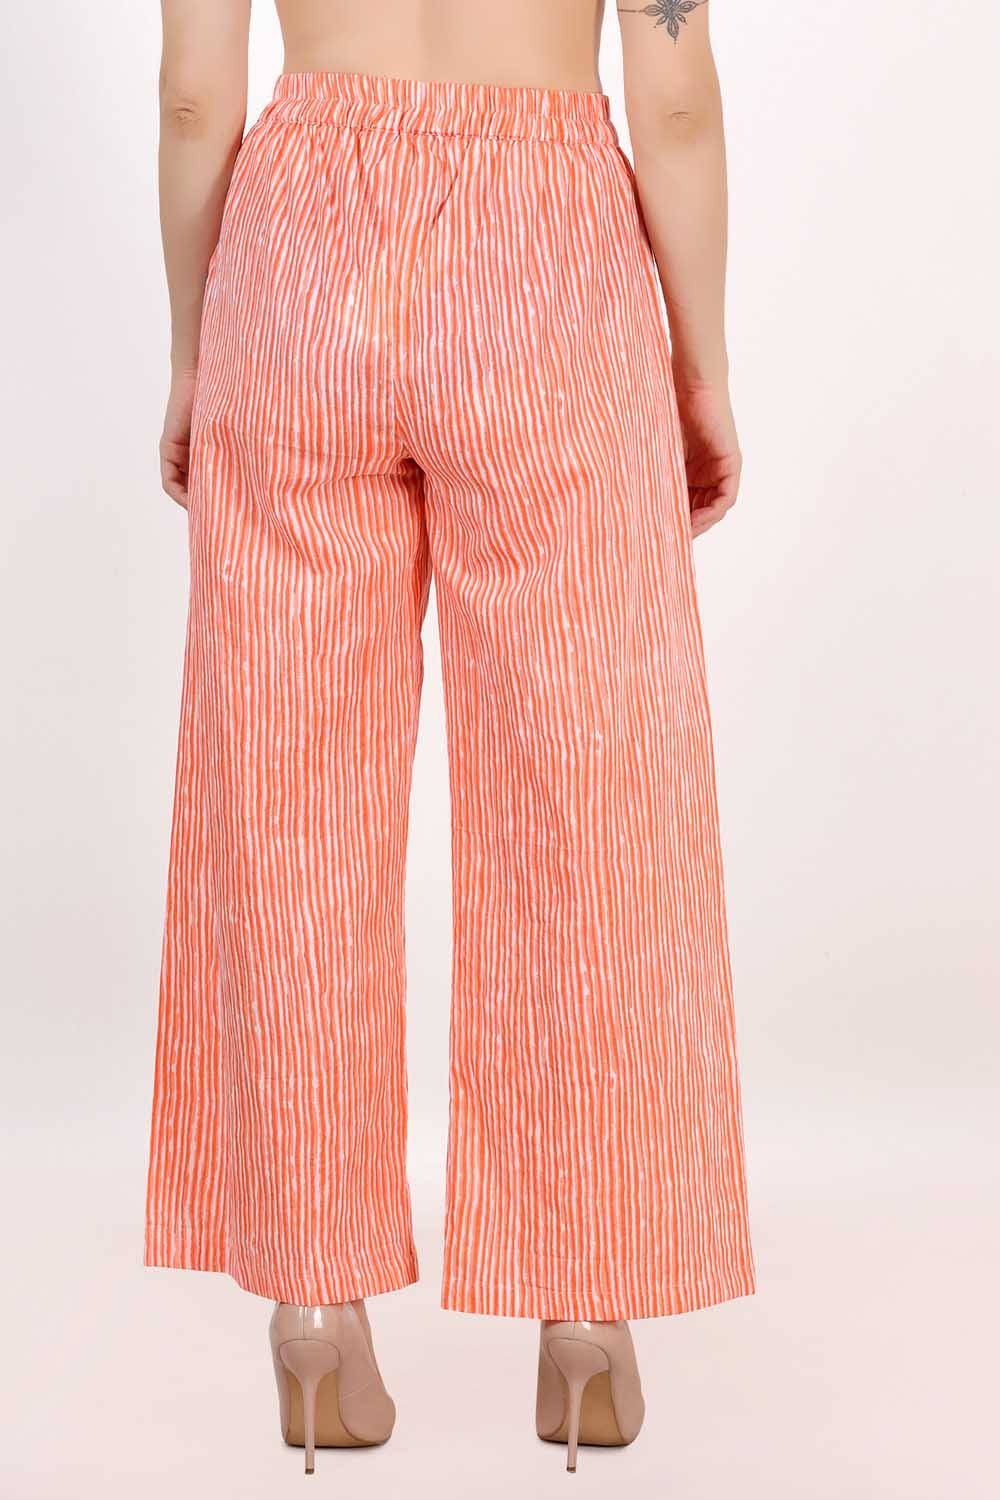 Stepping In Style” Striped High Waisted Palazzo Pants – Reign Kouture